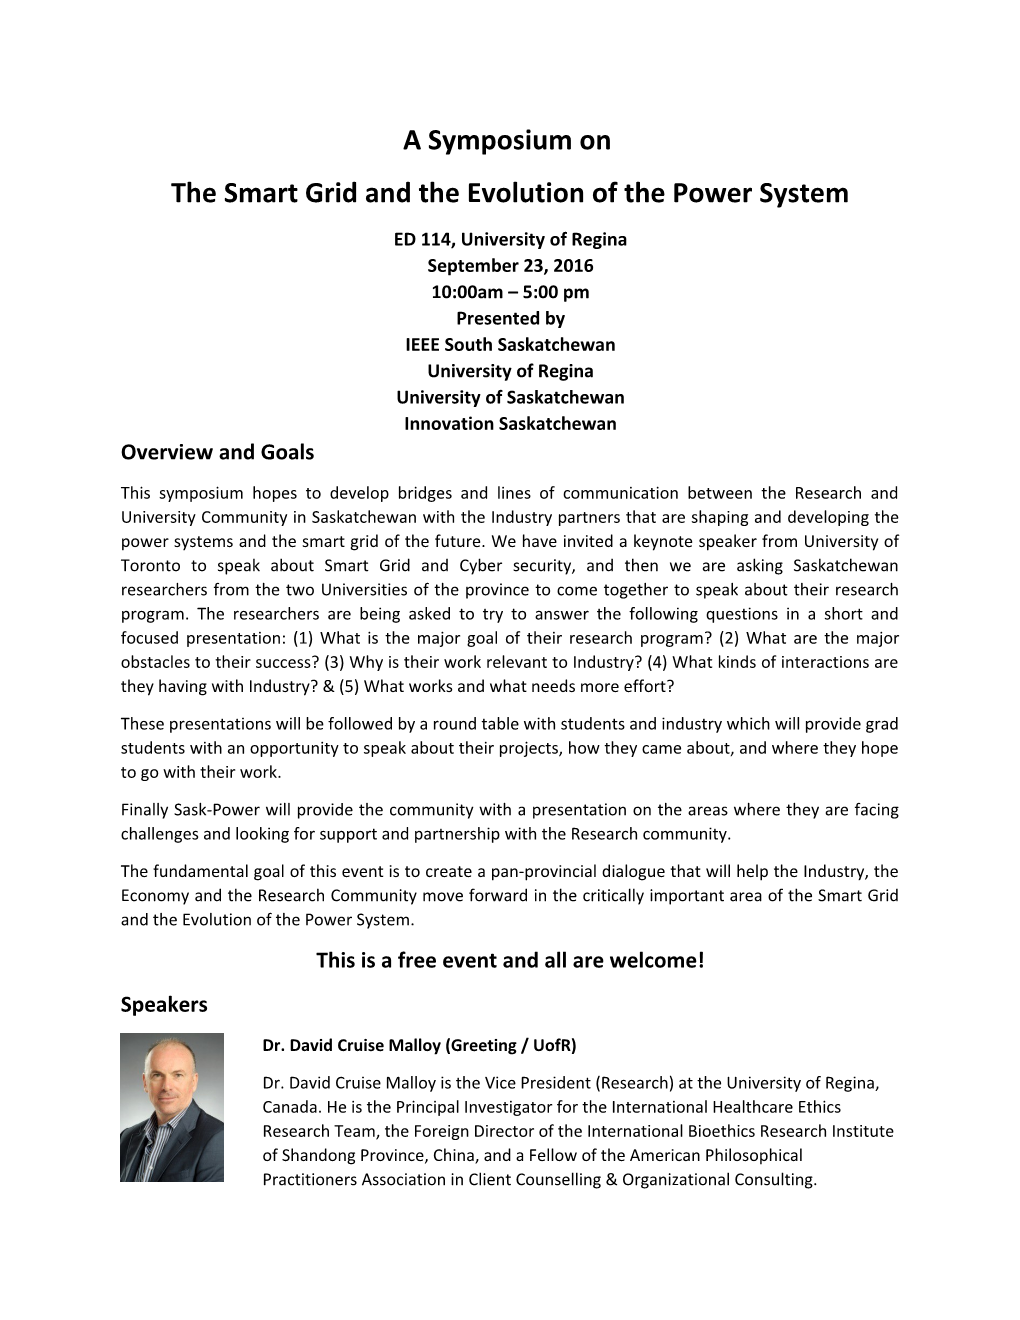 The Smart Grid and the Evolution of the Power System